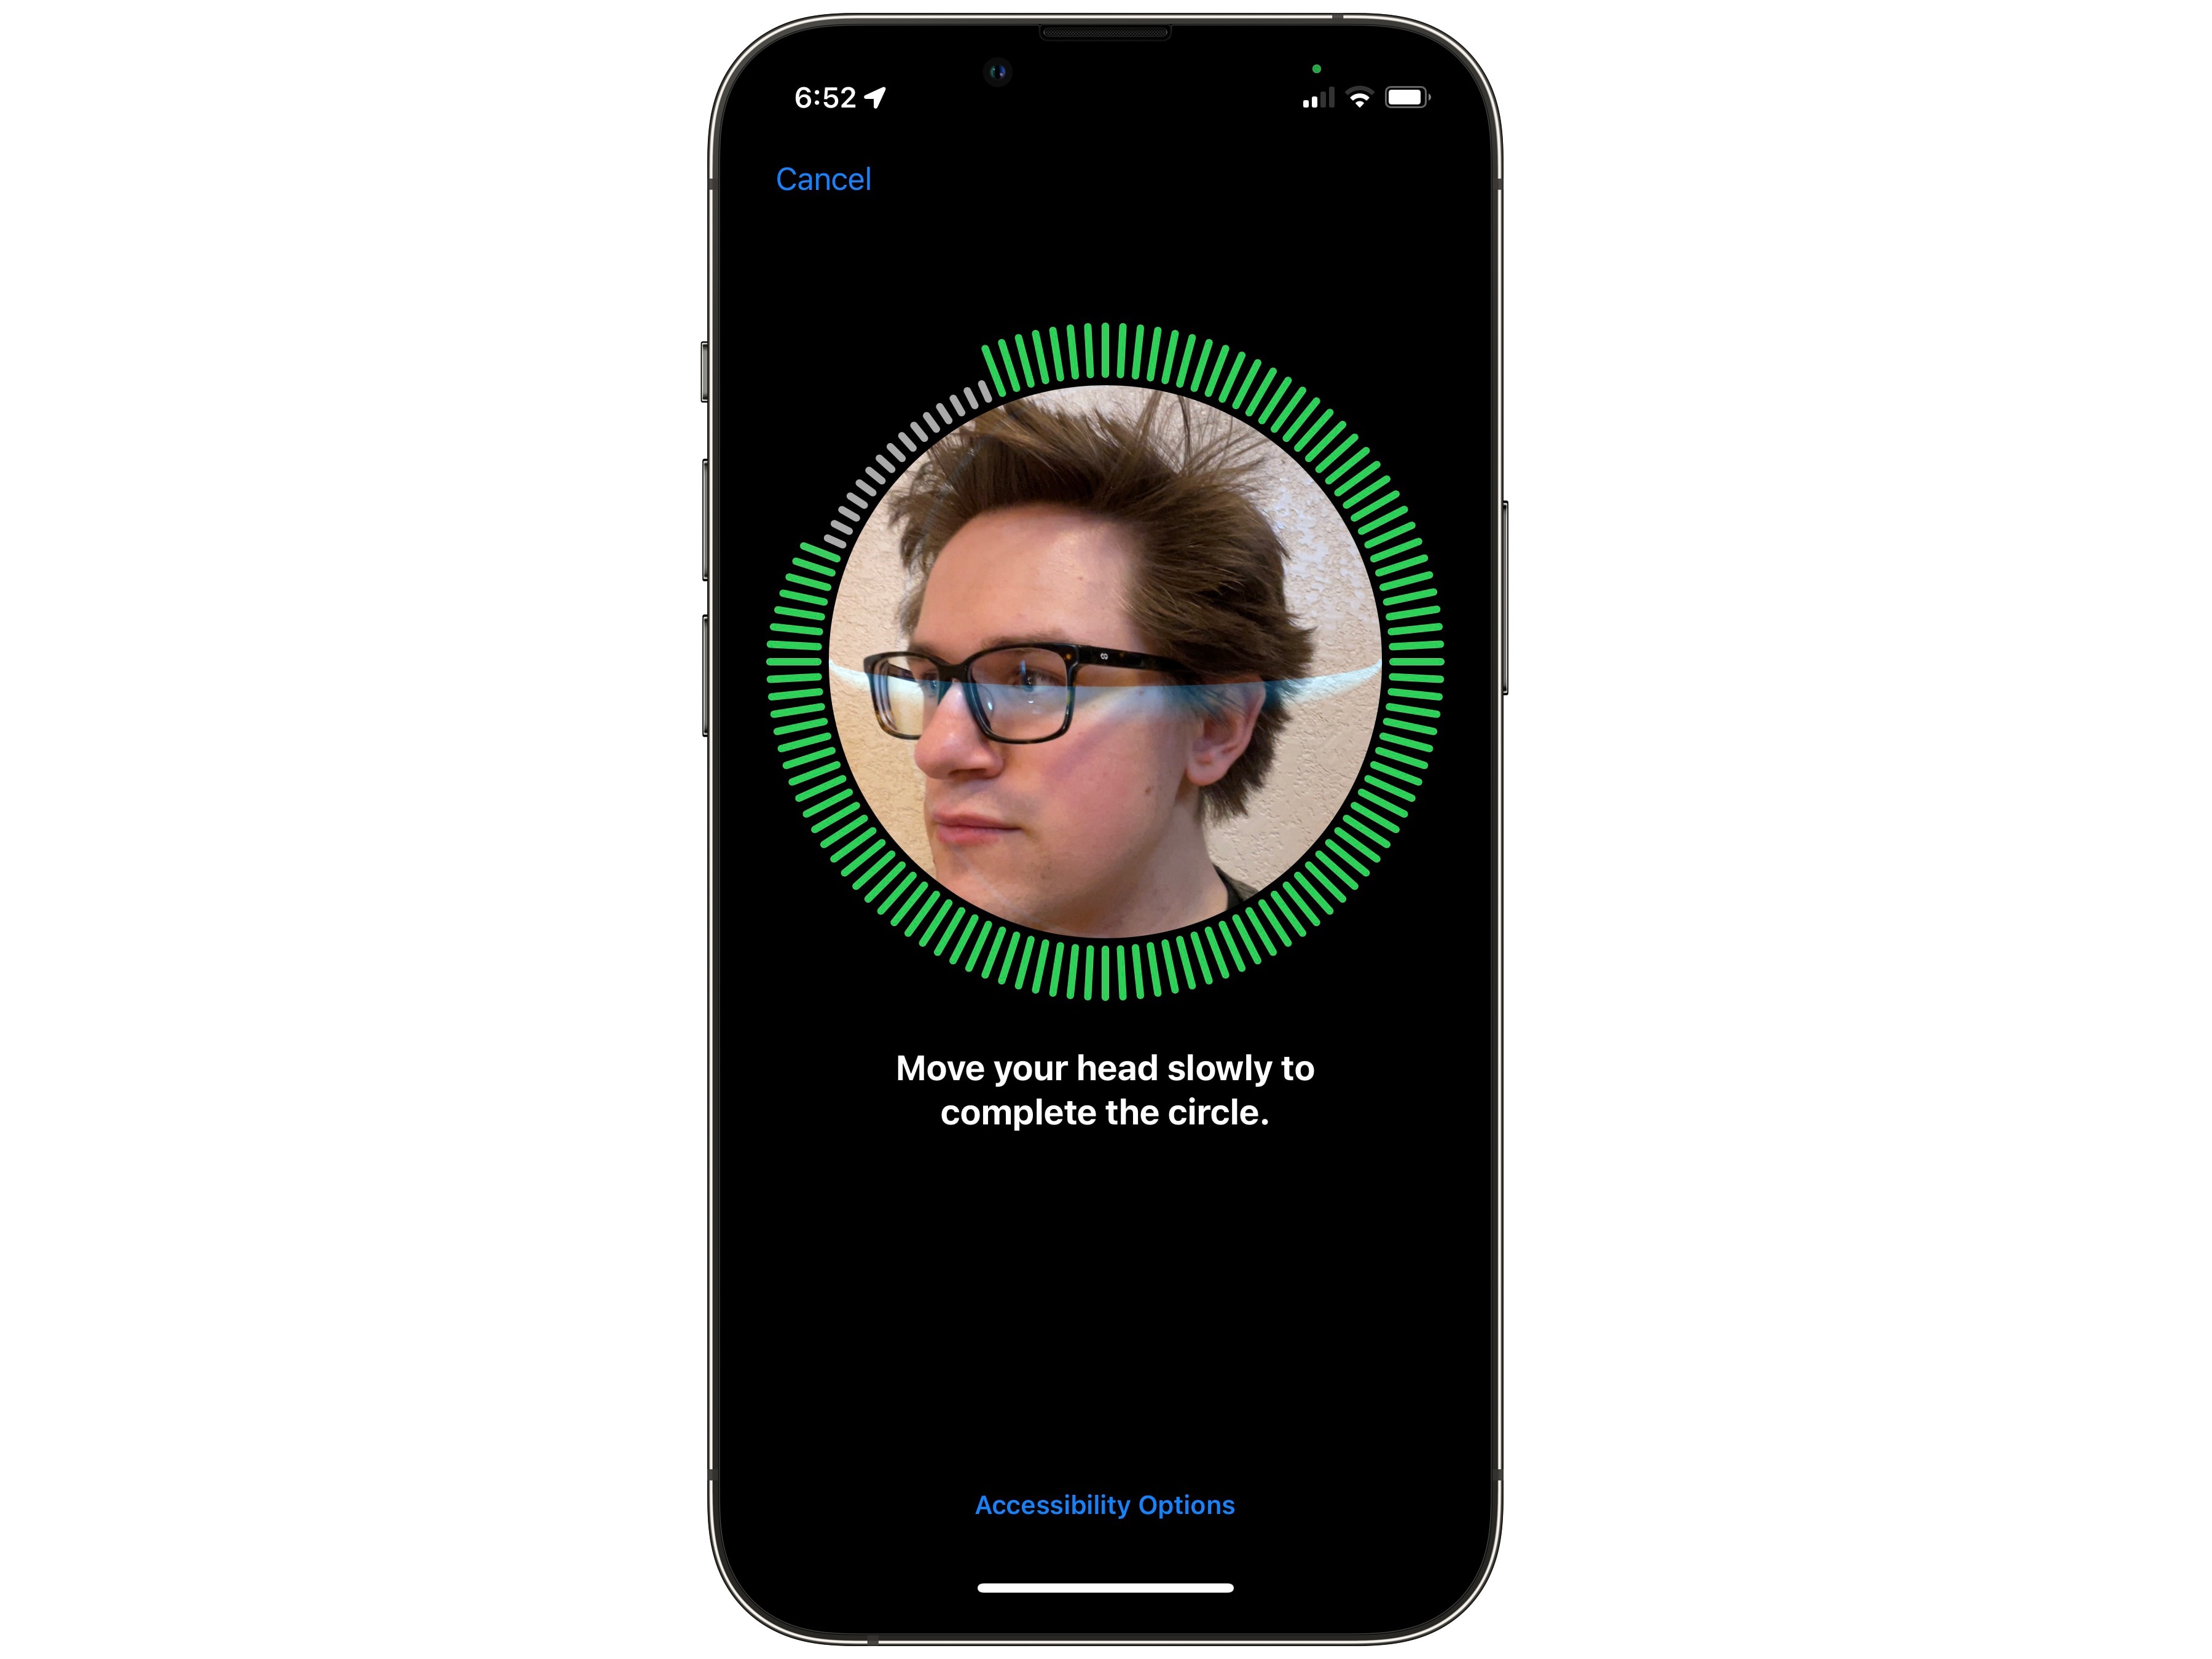 Setting up Face ID with a mask